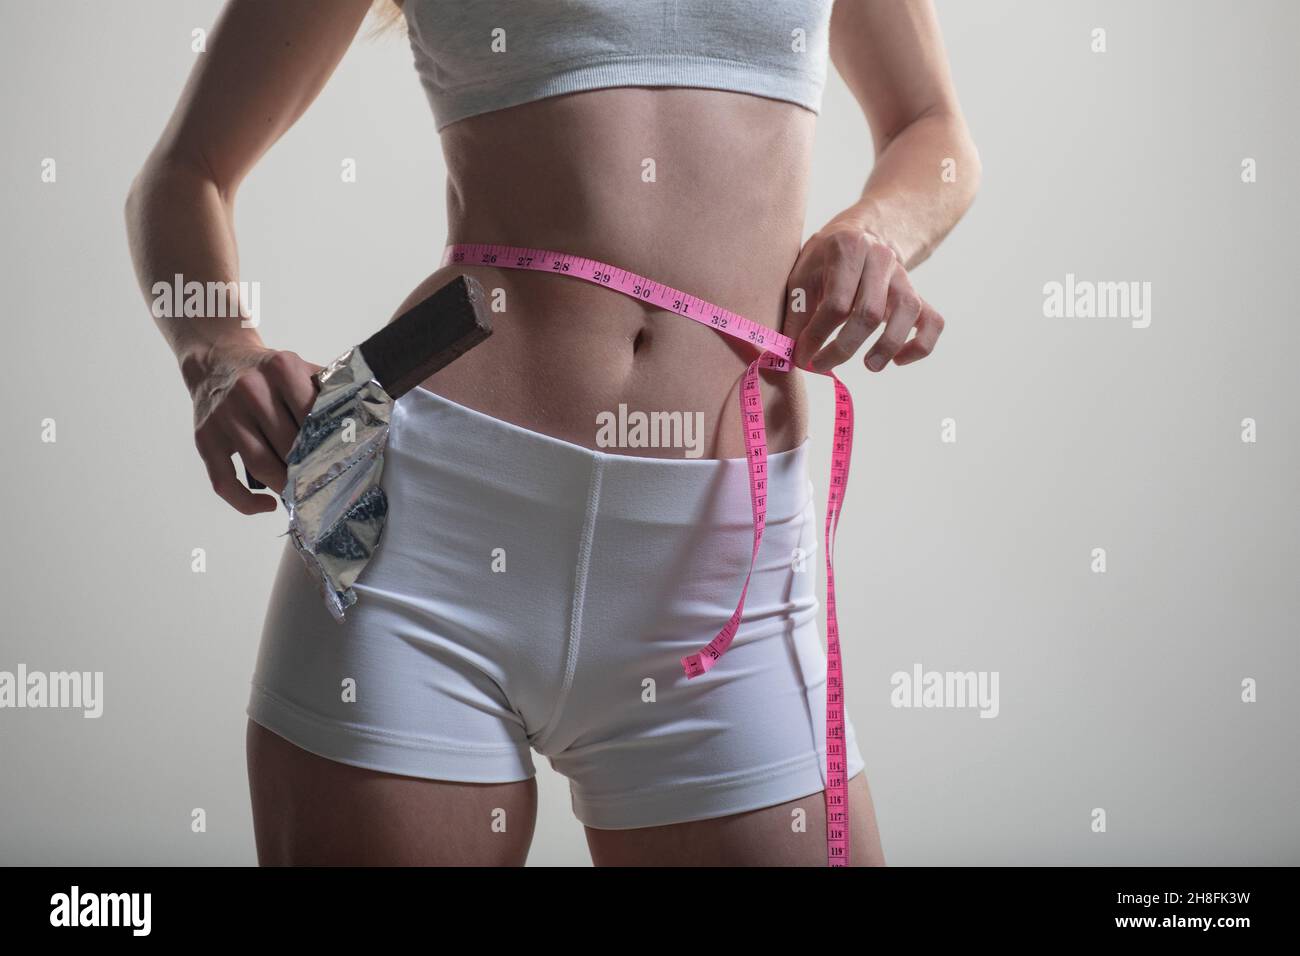 https://c8.alamy.com/comp/2H8FK3W/woman-with-measuring-tape-weight-loss-concept-slim-girl-with-centimeter-closeup-woman-measuring-her-waist-with-tape-2H8FK3W.jpg